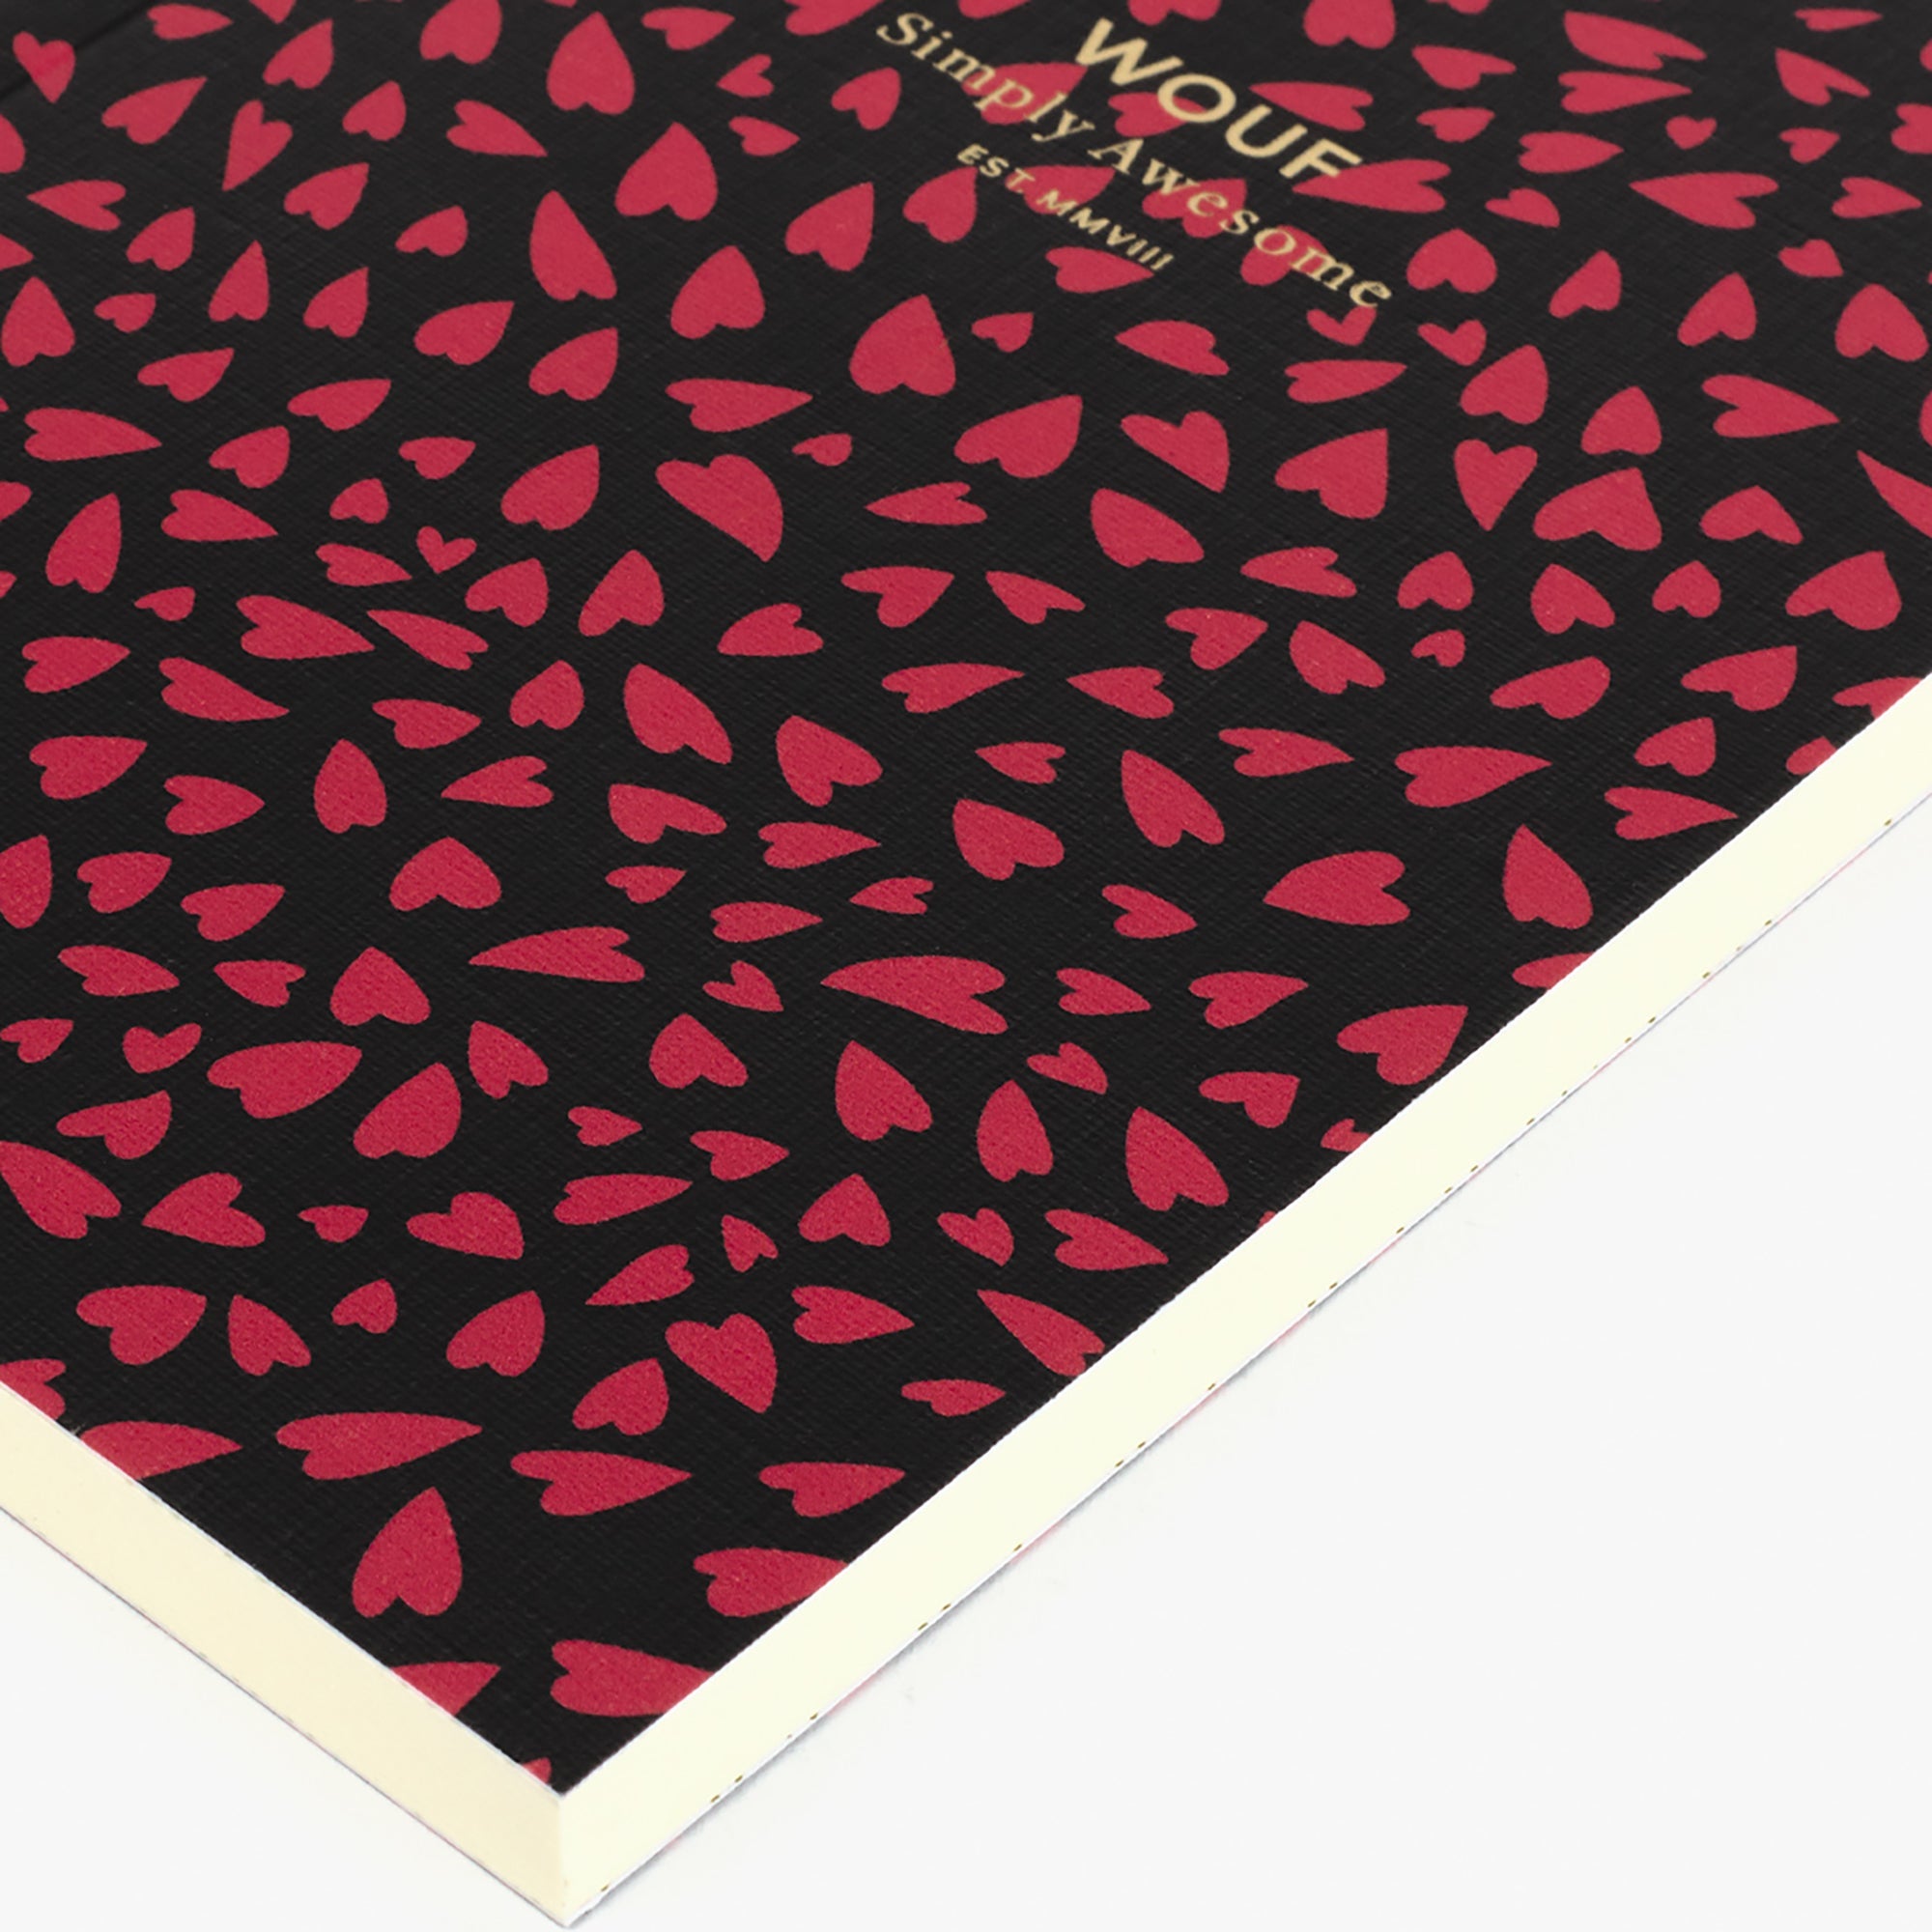 Cahier original ligné - Format A6 - Hearts by WOUF